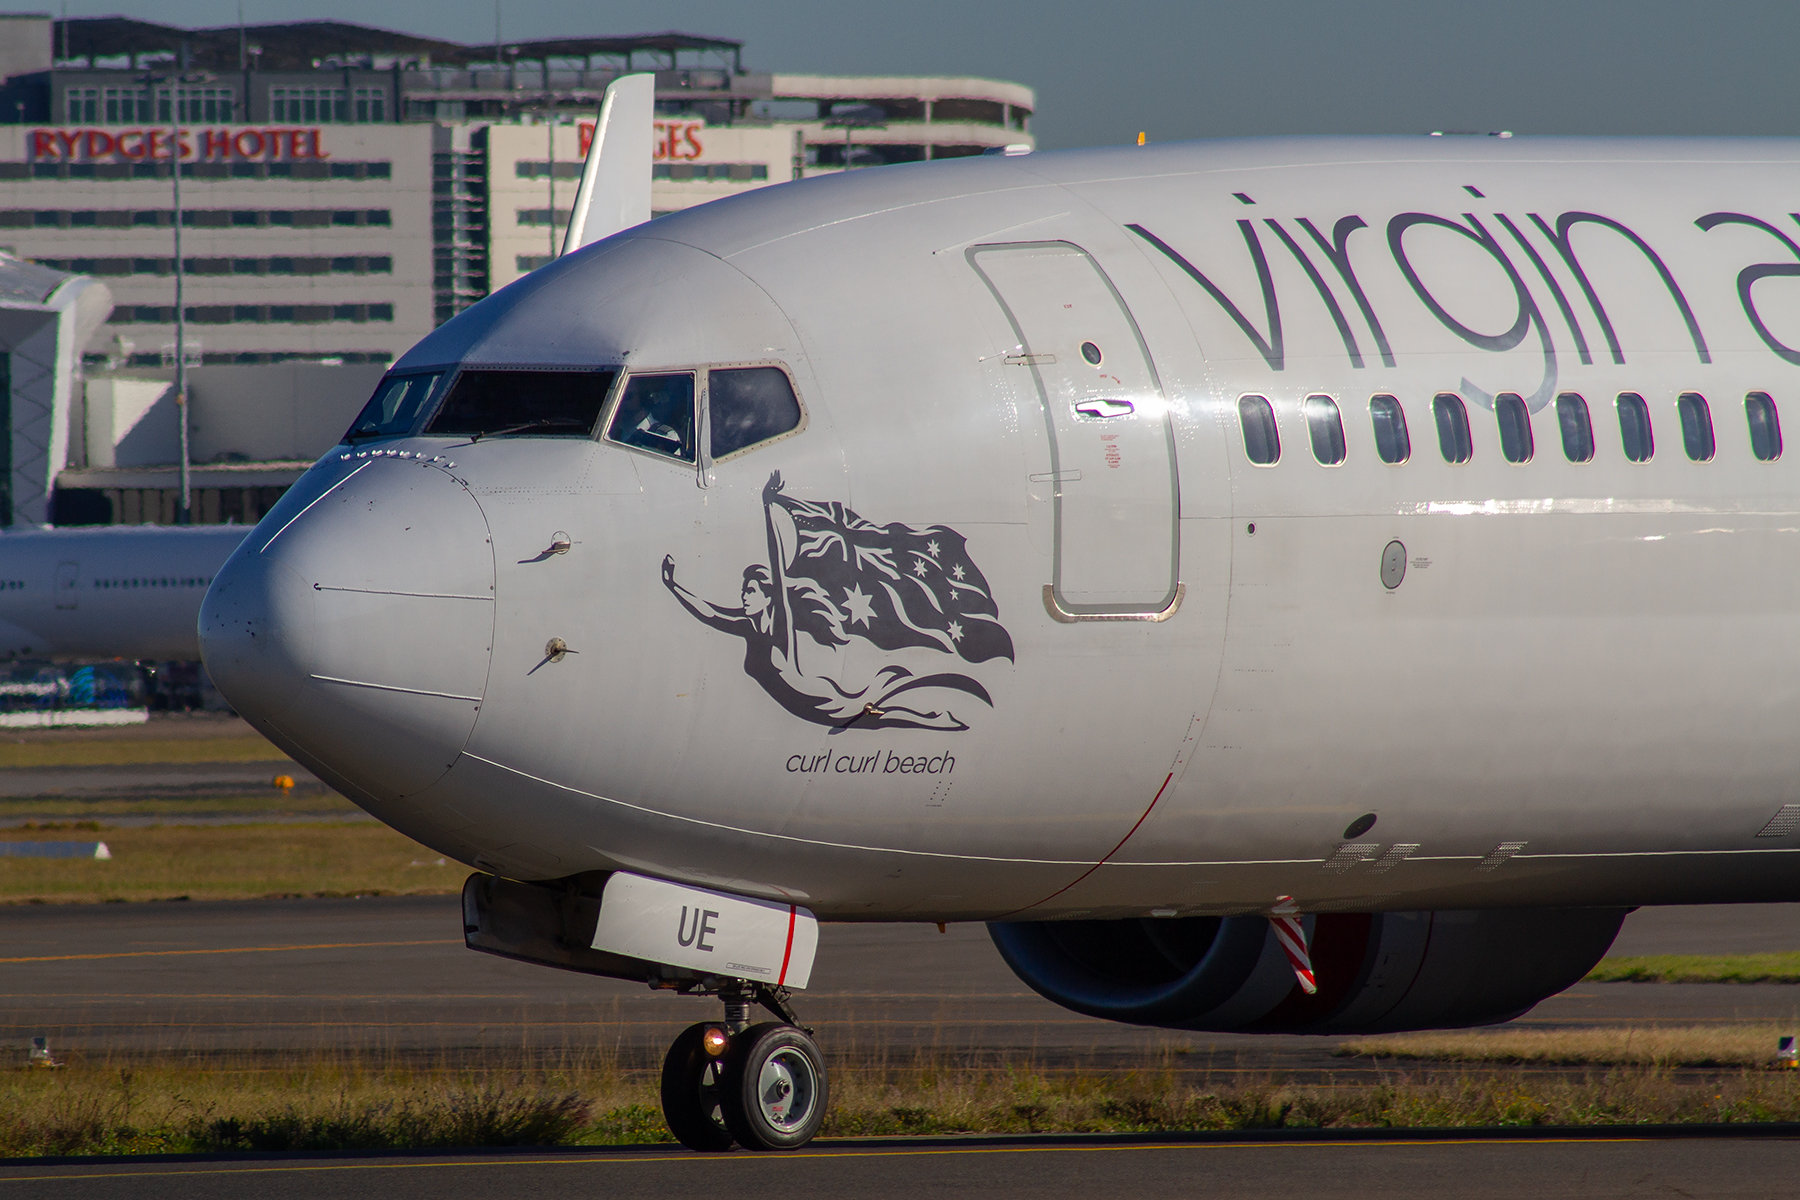 Virgin Australia Airlines Boeing 737-800 VH-VUE at Kingsford Smith